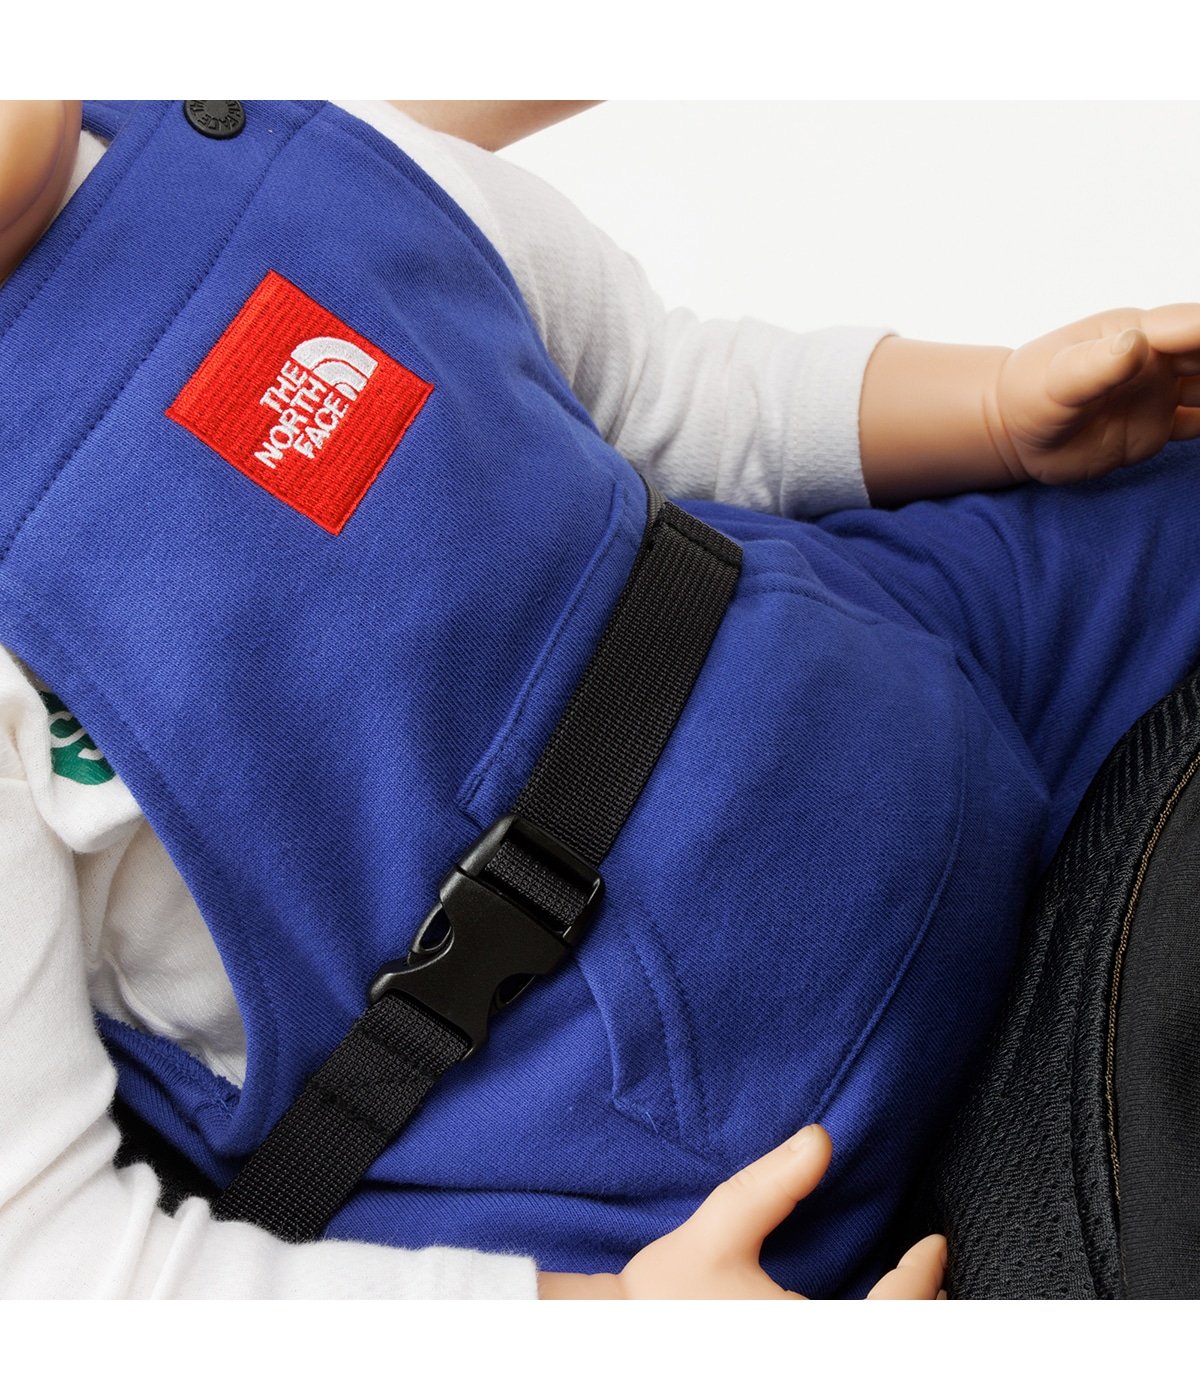 Baby Sling Bag | THE NORTH FACE(ザ ノースフェイス) / バッグ バッグ 